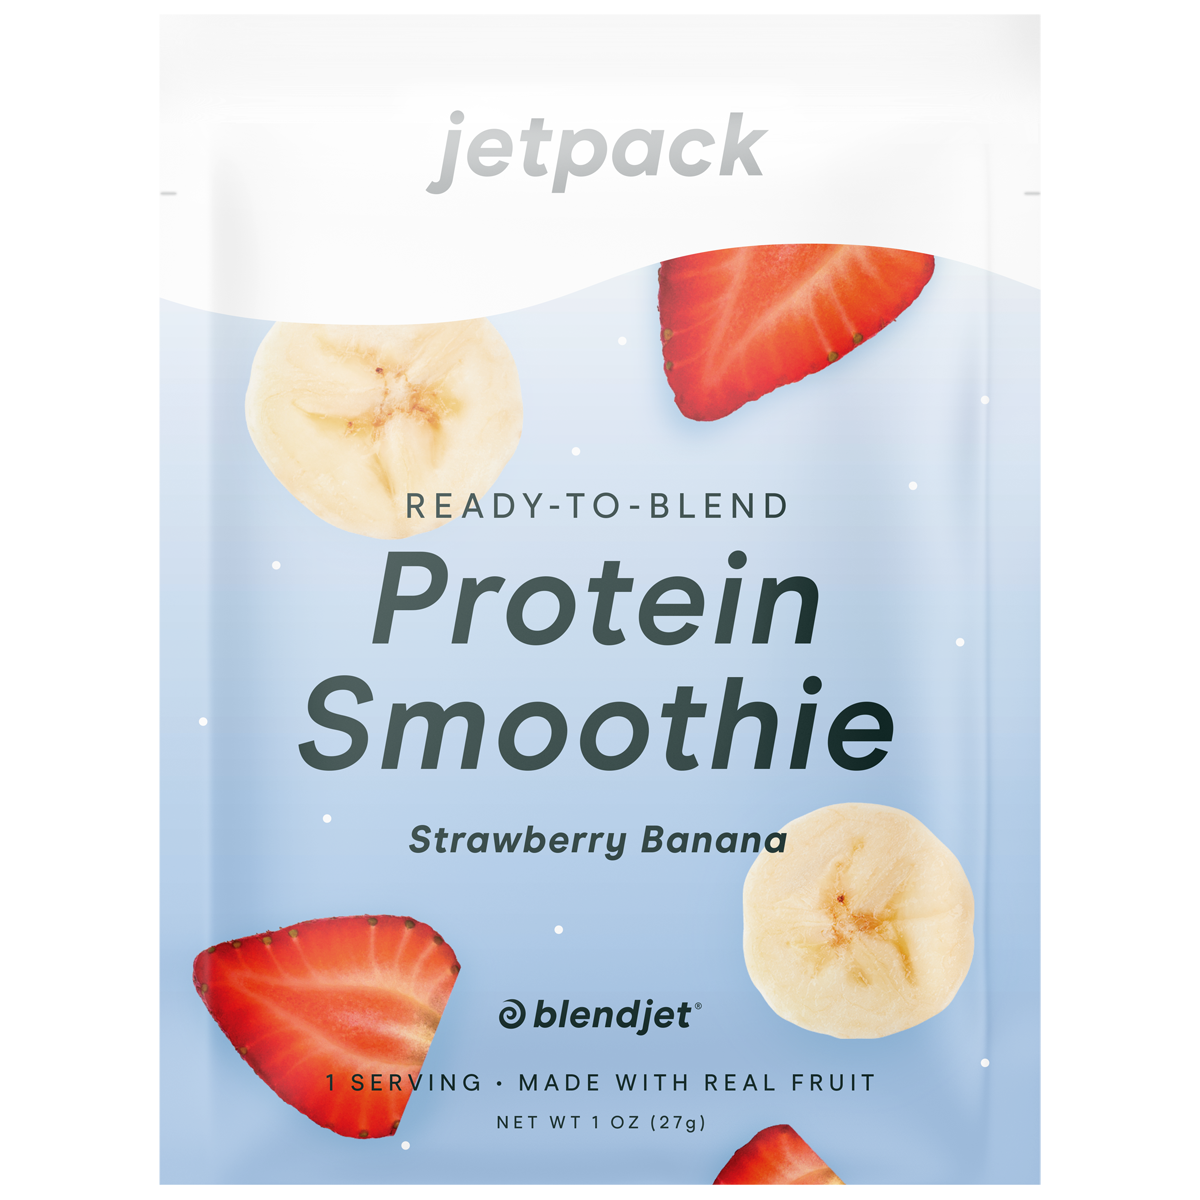 jetpack image Instant Protein Smoothies